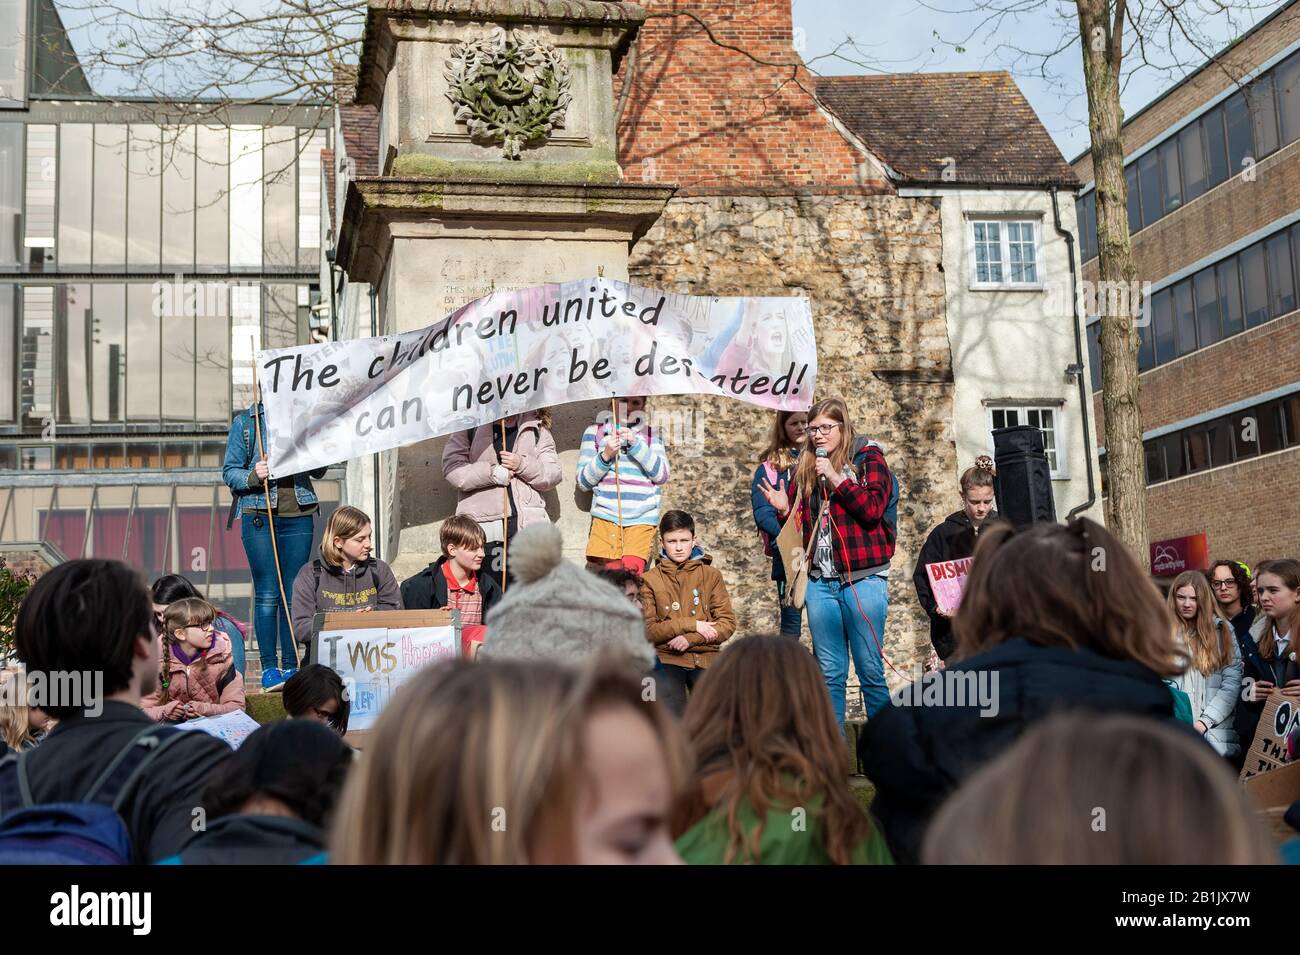 Protesters calling for unity in the fight against Climate Change, while EJ Fawcett addresses the crowd at the Valentine's Day Youth Climate Strike in Oxford, United Kingdom, on the anniversary of the first UK youth strike for climate in 2019. Stock Photo